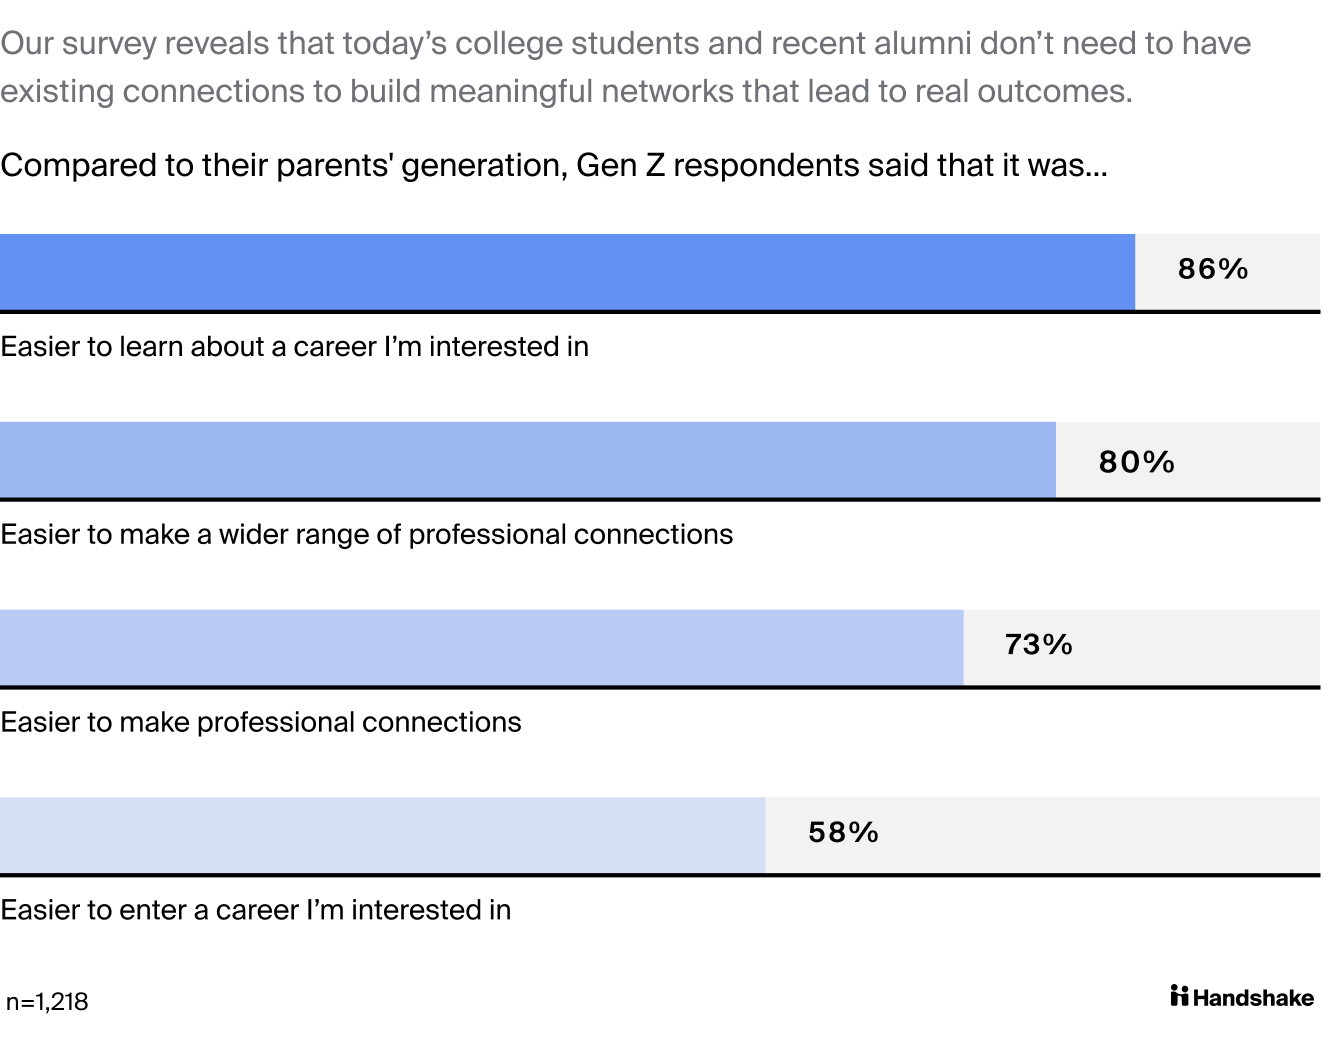 Our survey reveals that today’s college students and recent alumni don’t need to have existing connections to build meaningful networks that lead to real outcomes. Alumni say it's now easier to learn about a career they're interested in (86%), make a wider range of connections (80%), make professional connections in general (73%), and enter a career they're interested in (58%).